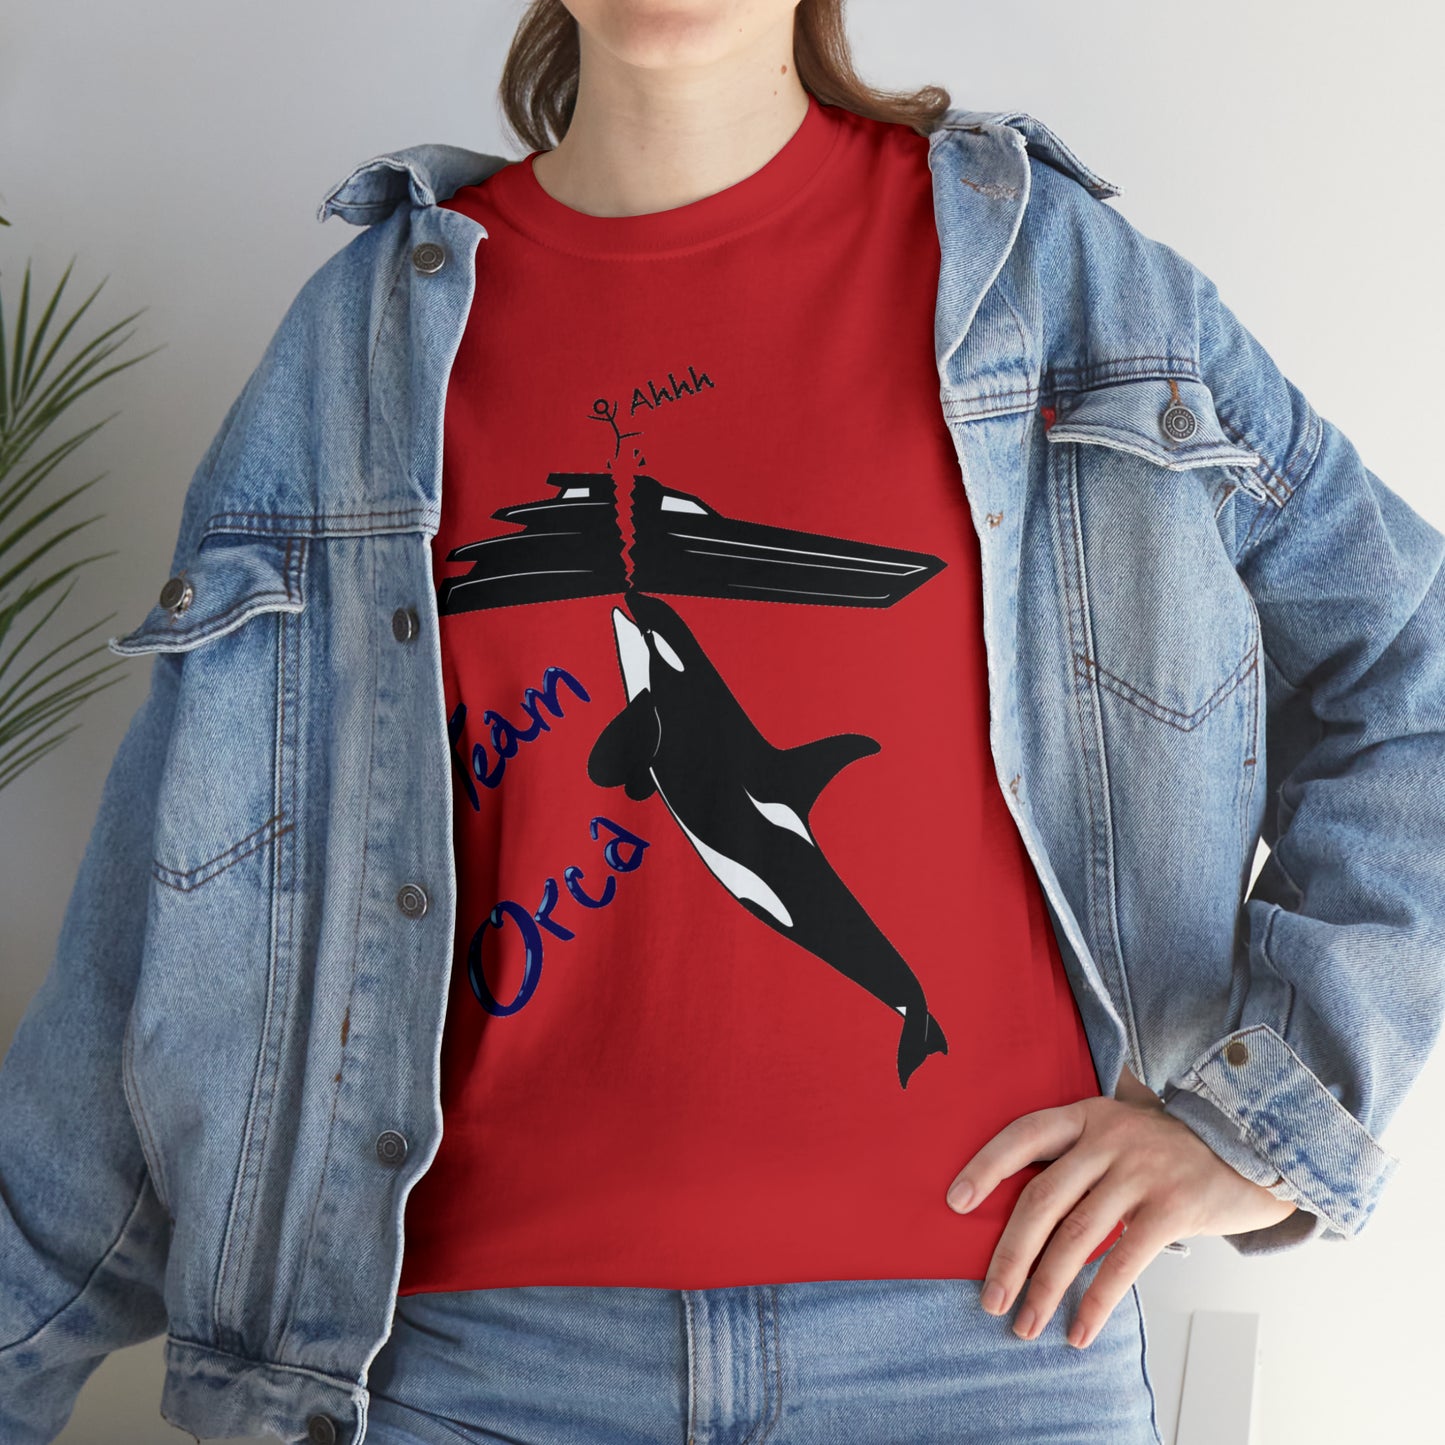 The Team Orca unisex heavy cotton tee is the basic staple of any wardrobe. It is the foundation upon which casual fashion grows. All it needs is a personalized design to elevate things to profitability.